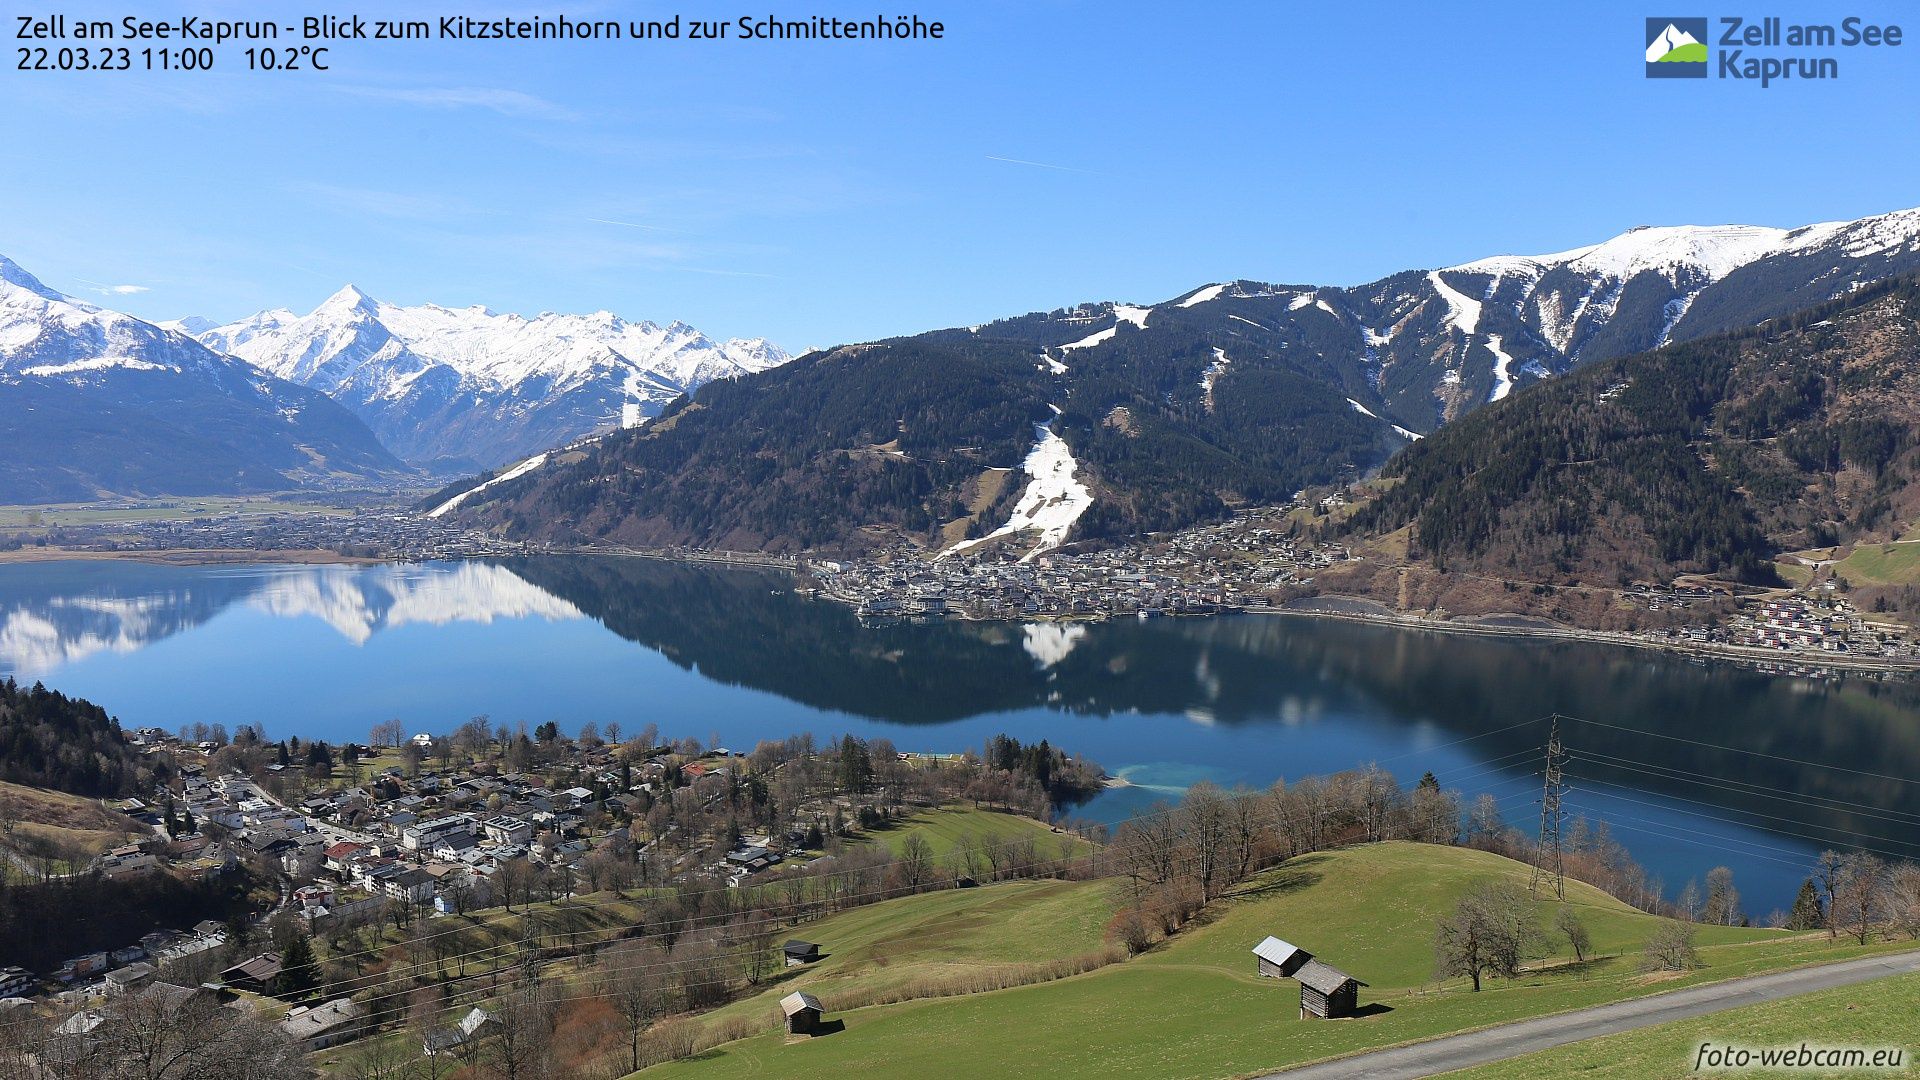 Warm and spring-like in Zell am See (foto-webcam.eu)